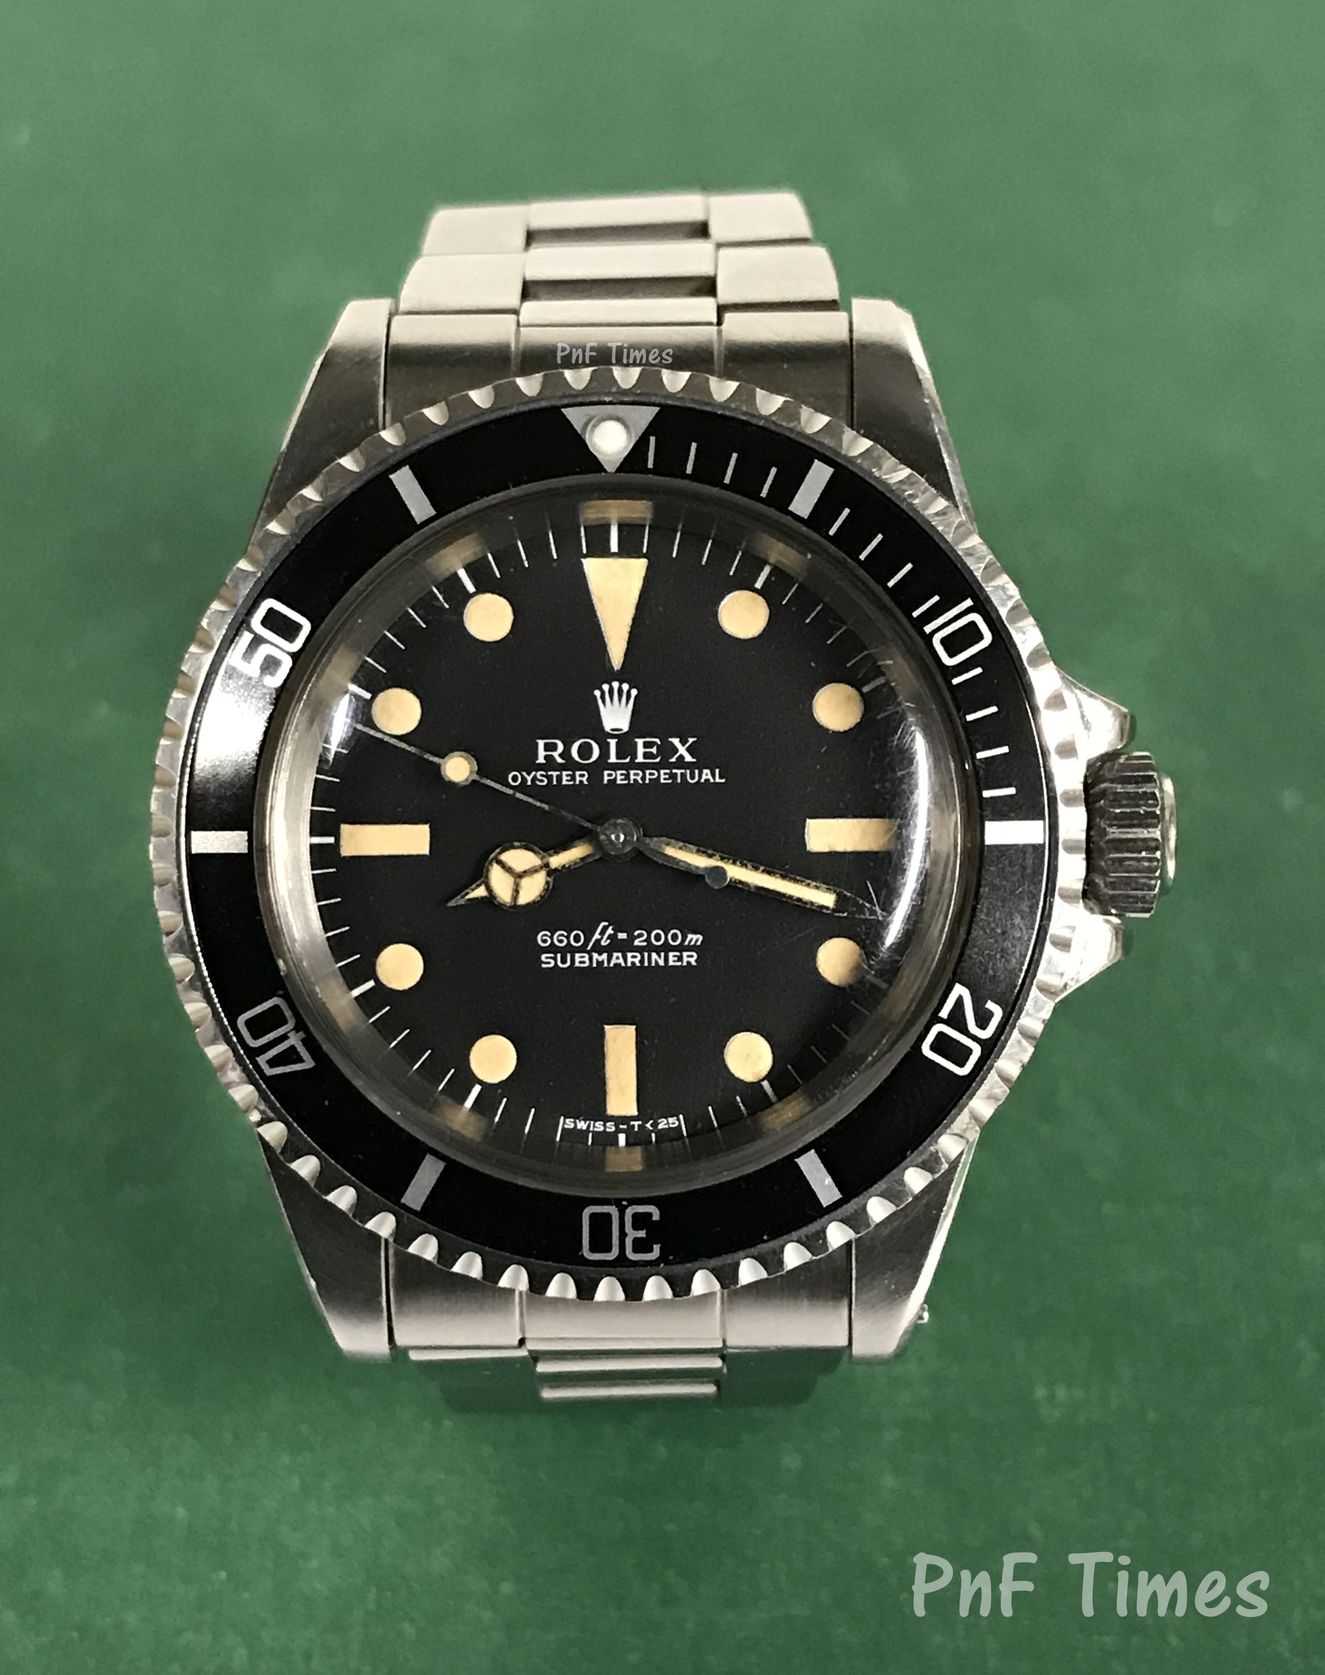 Rolex 5513 Oyster Perpetual Submariner 